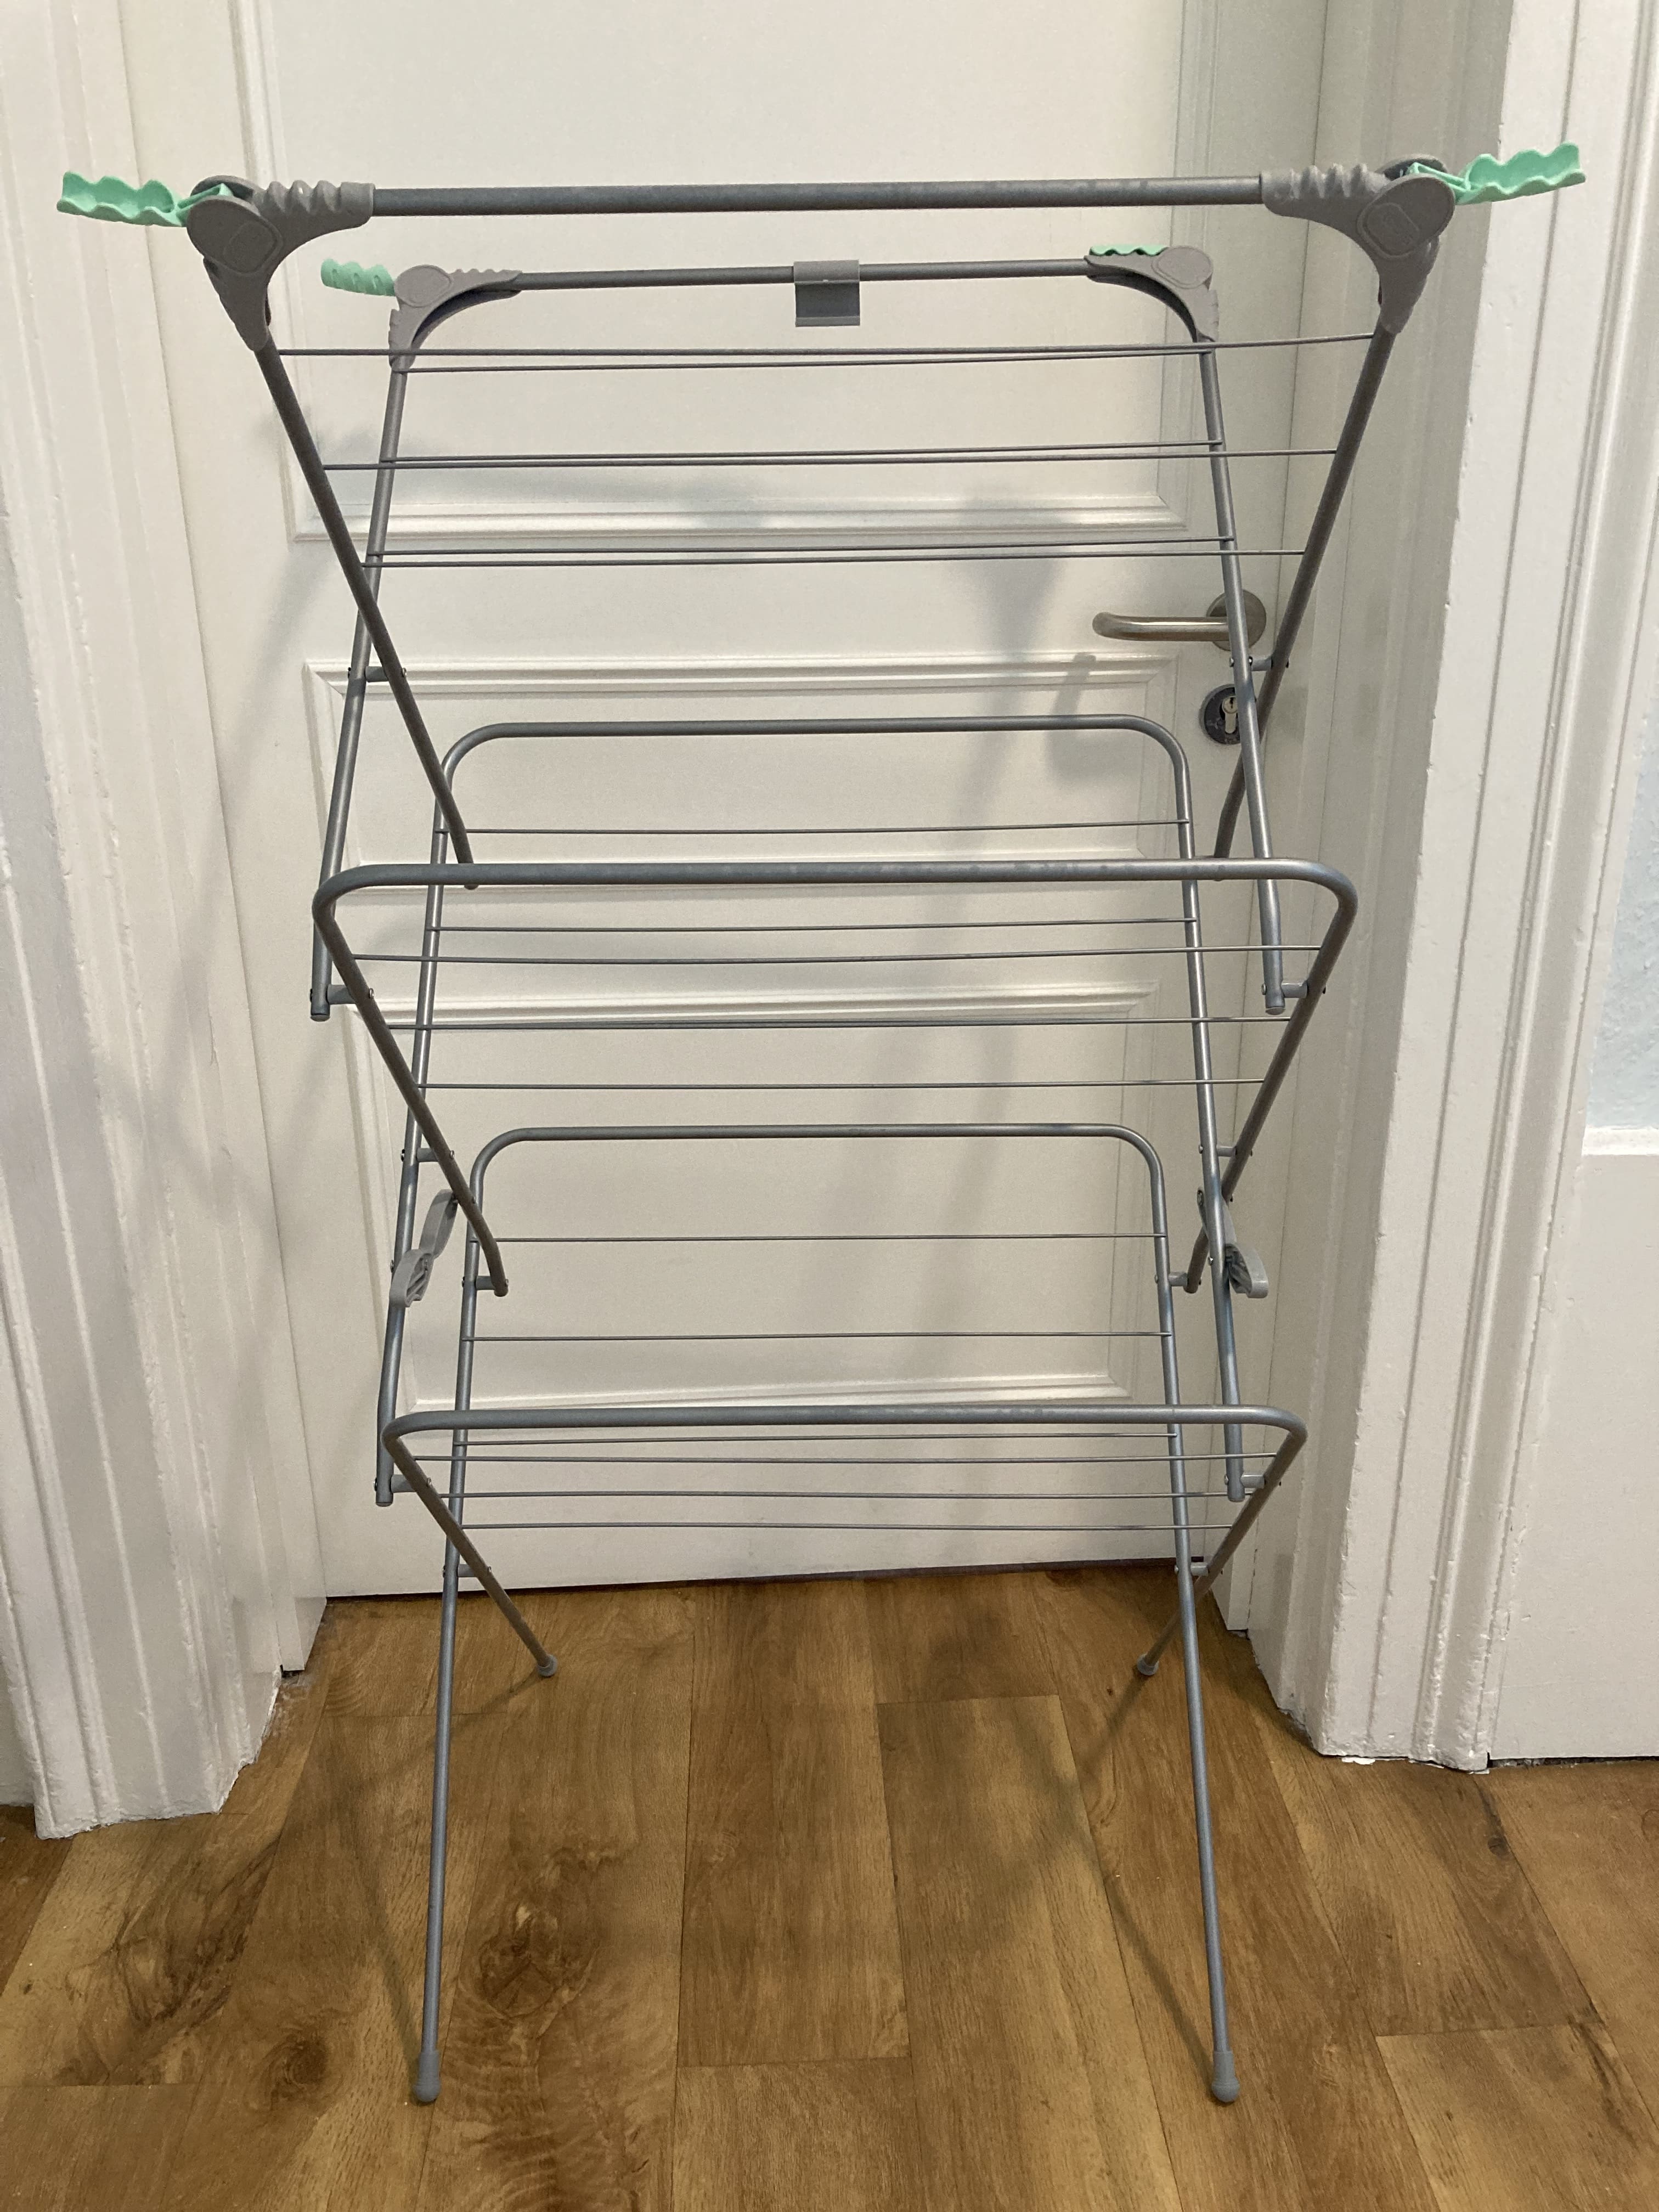 Foldable drying rack | Students Union UCL